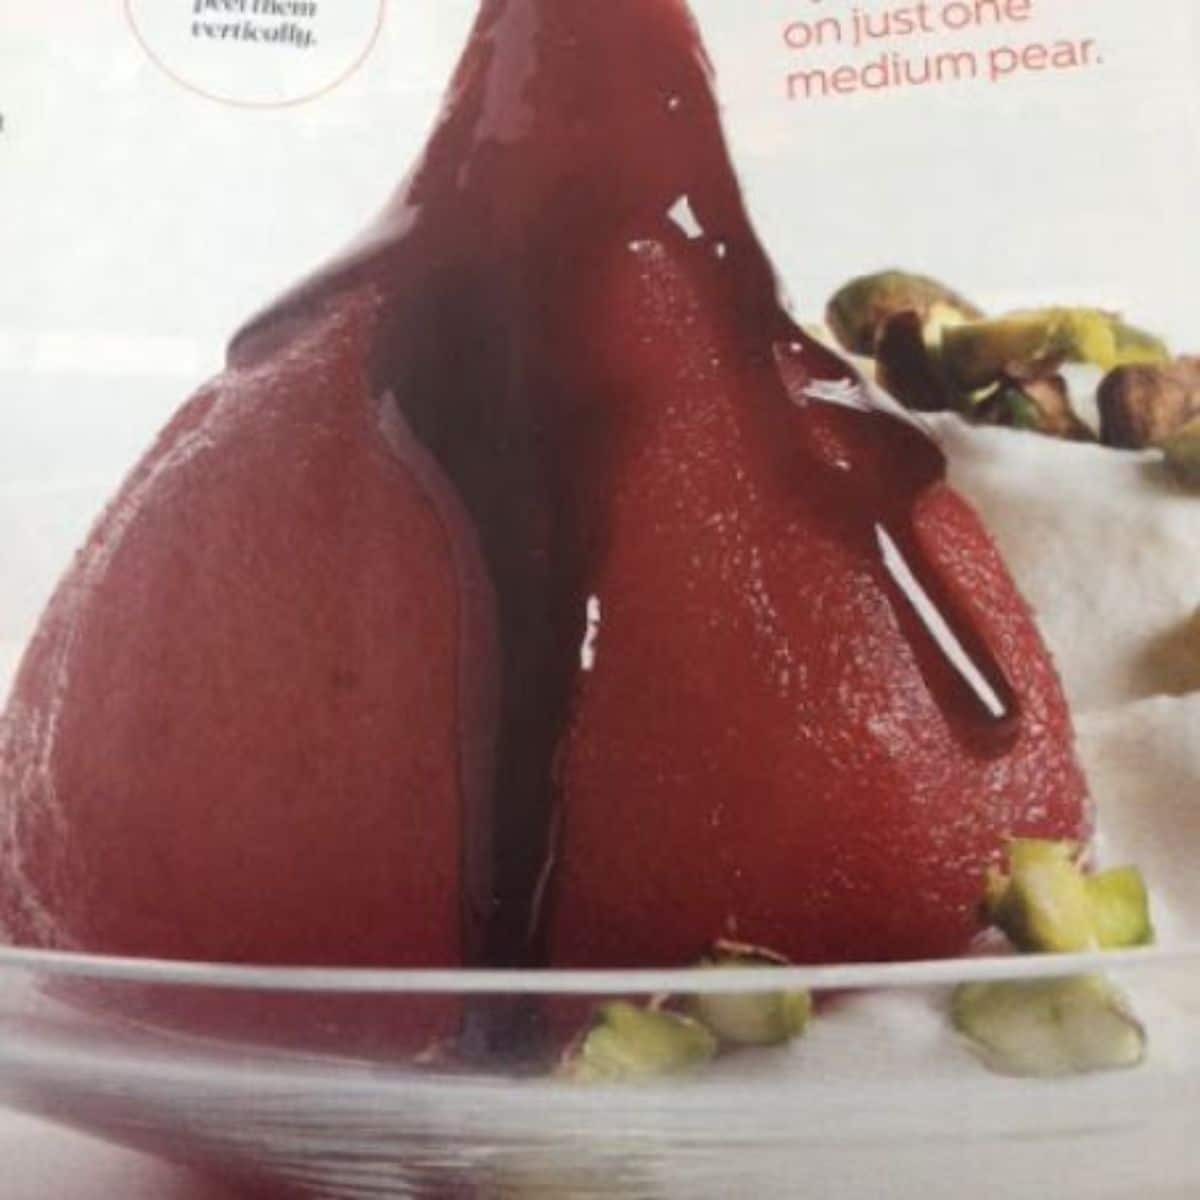 Flavorful wine-poached pears with greek yogurt cream on a glass plate.